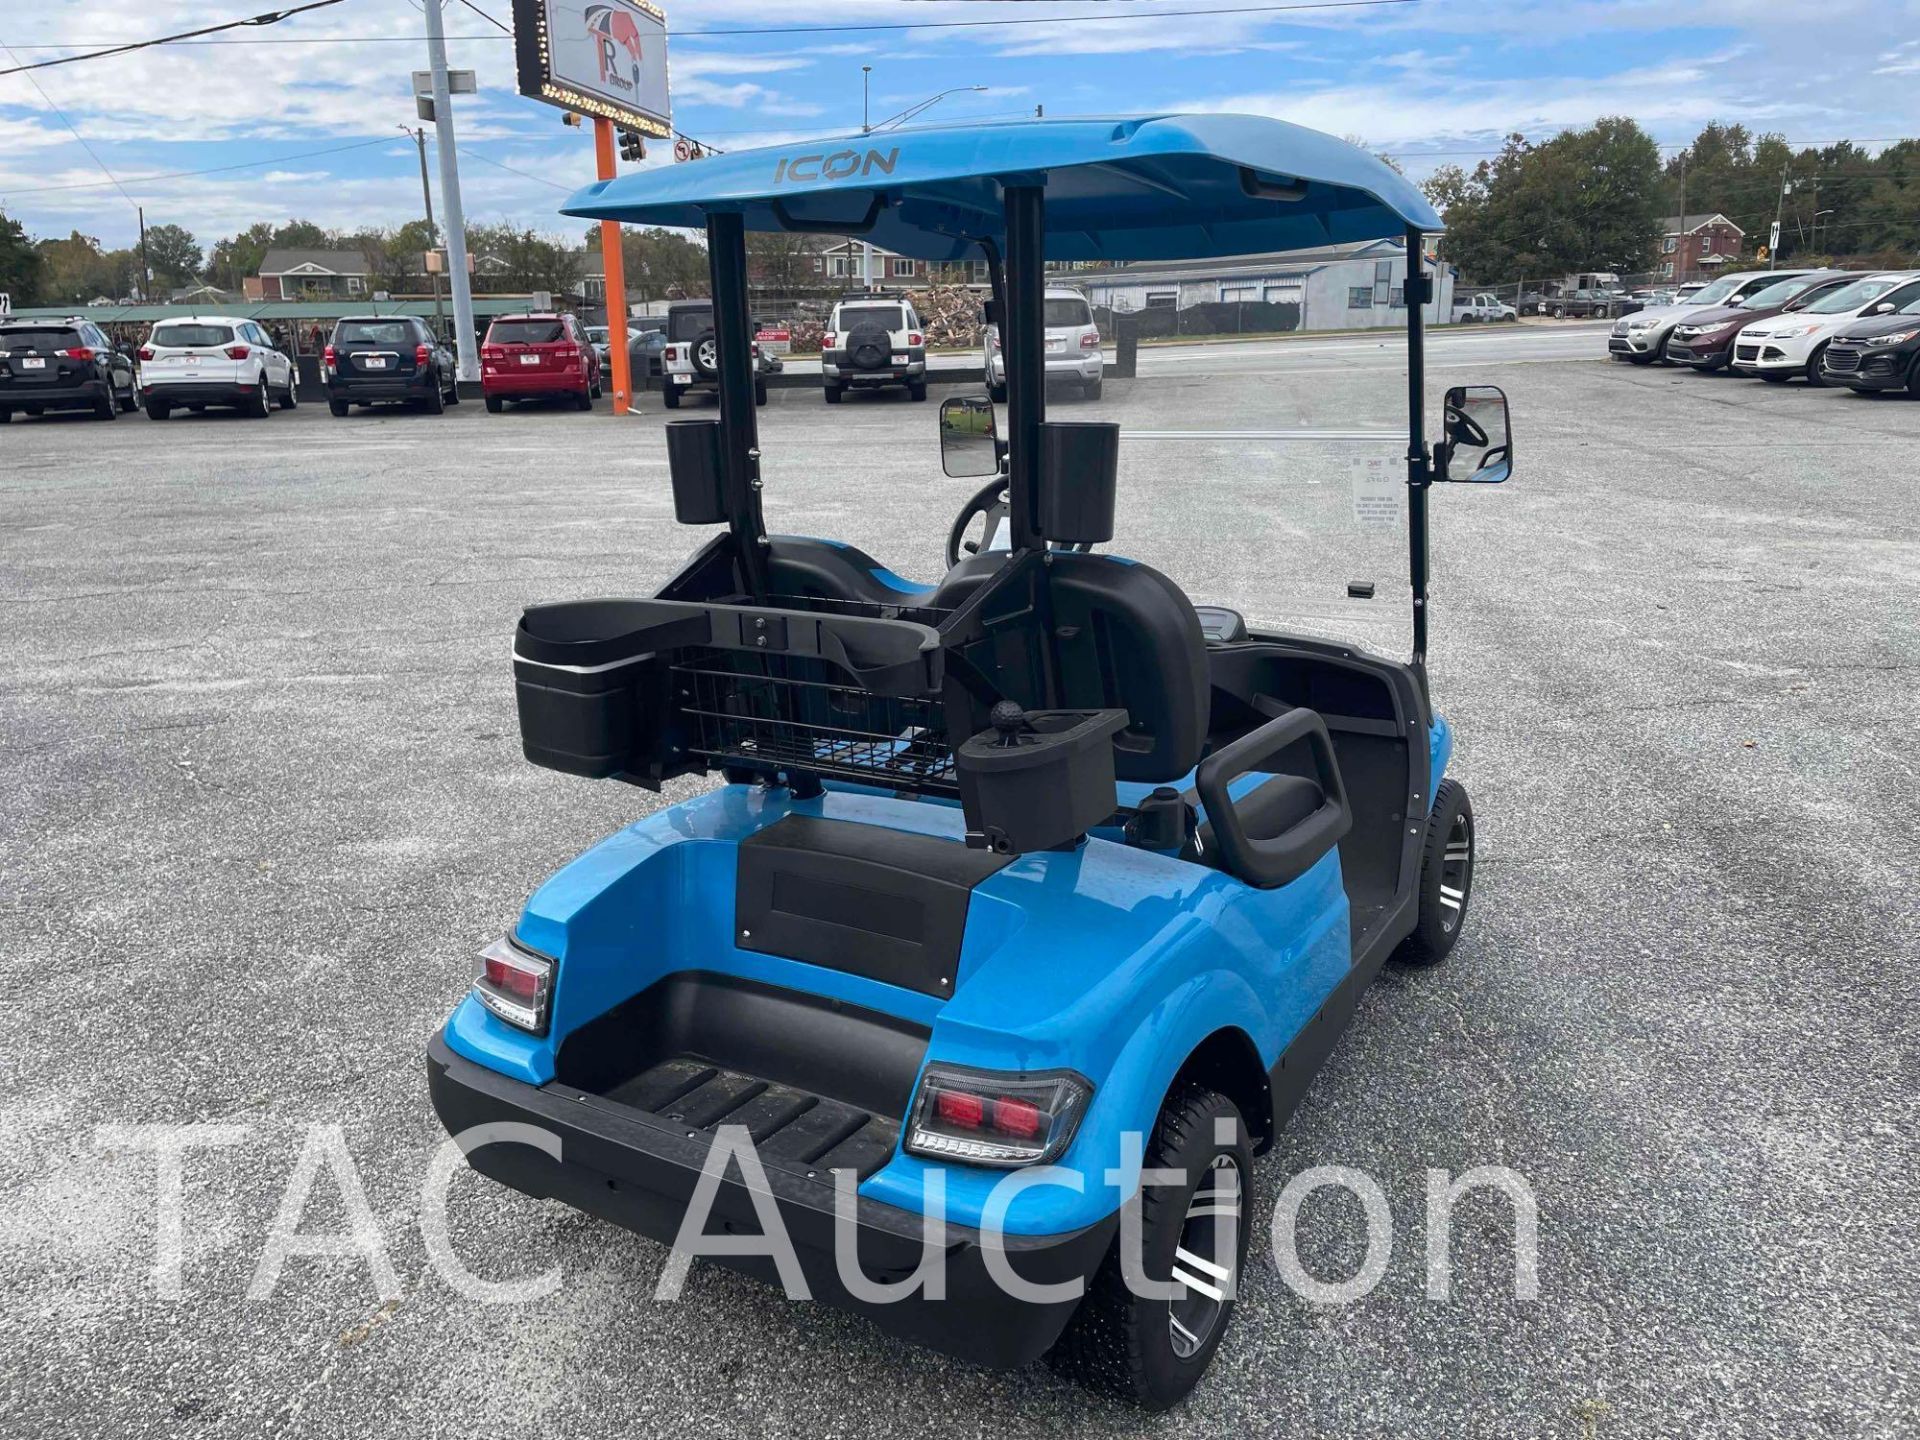 New 2022 ICON i20 Electric Golf Cart W/ Charger - Image 5 of 22